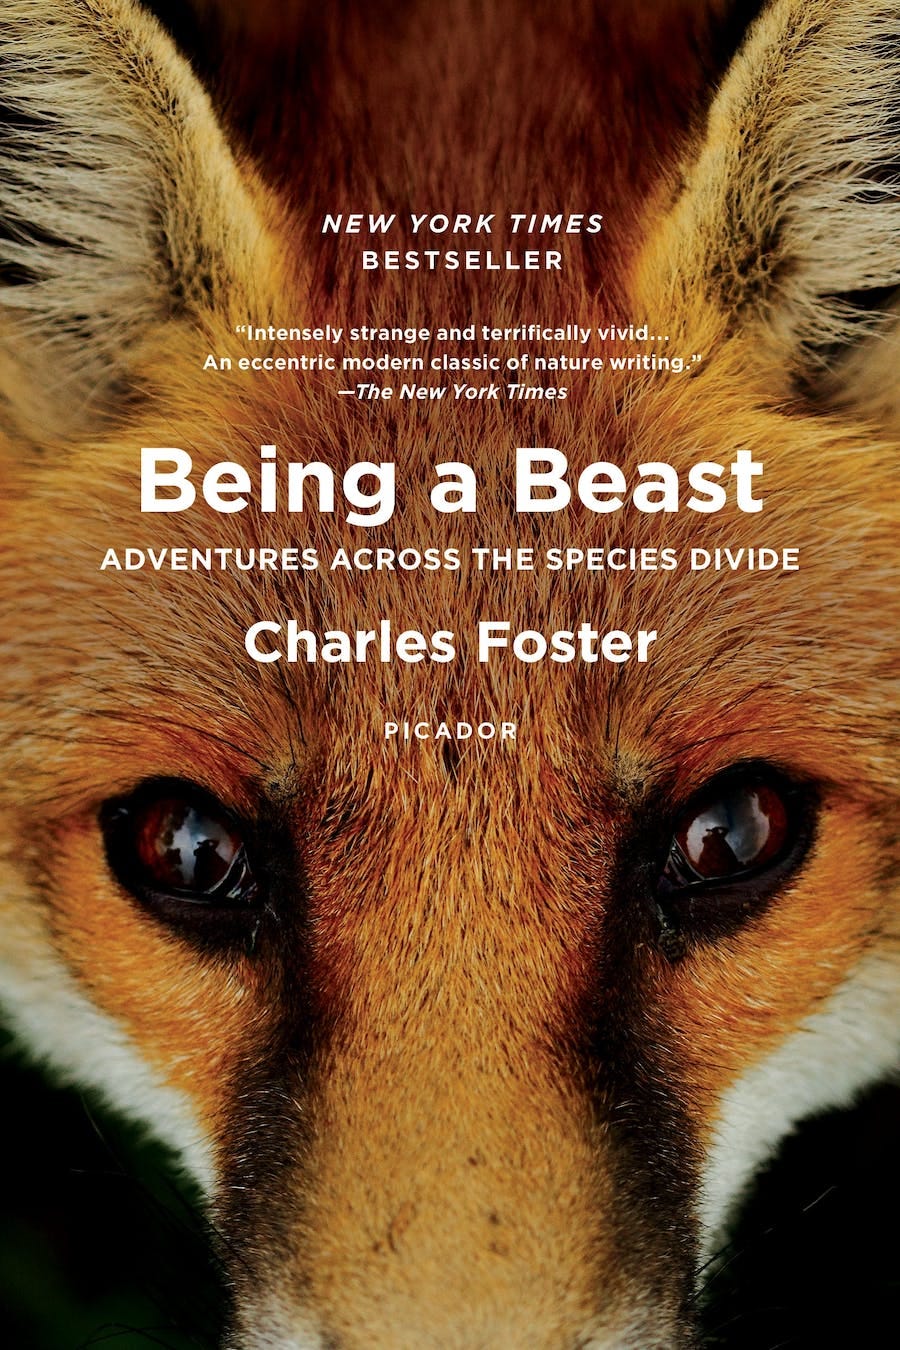 Book cover for ‘Being a Beast’ by Charles Foster. Cover features a closeup of a red fox with beautiful brown eyes.